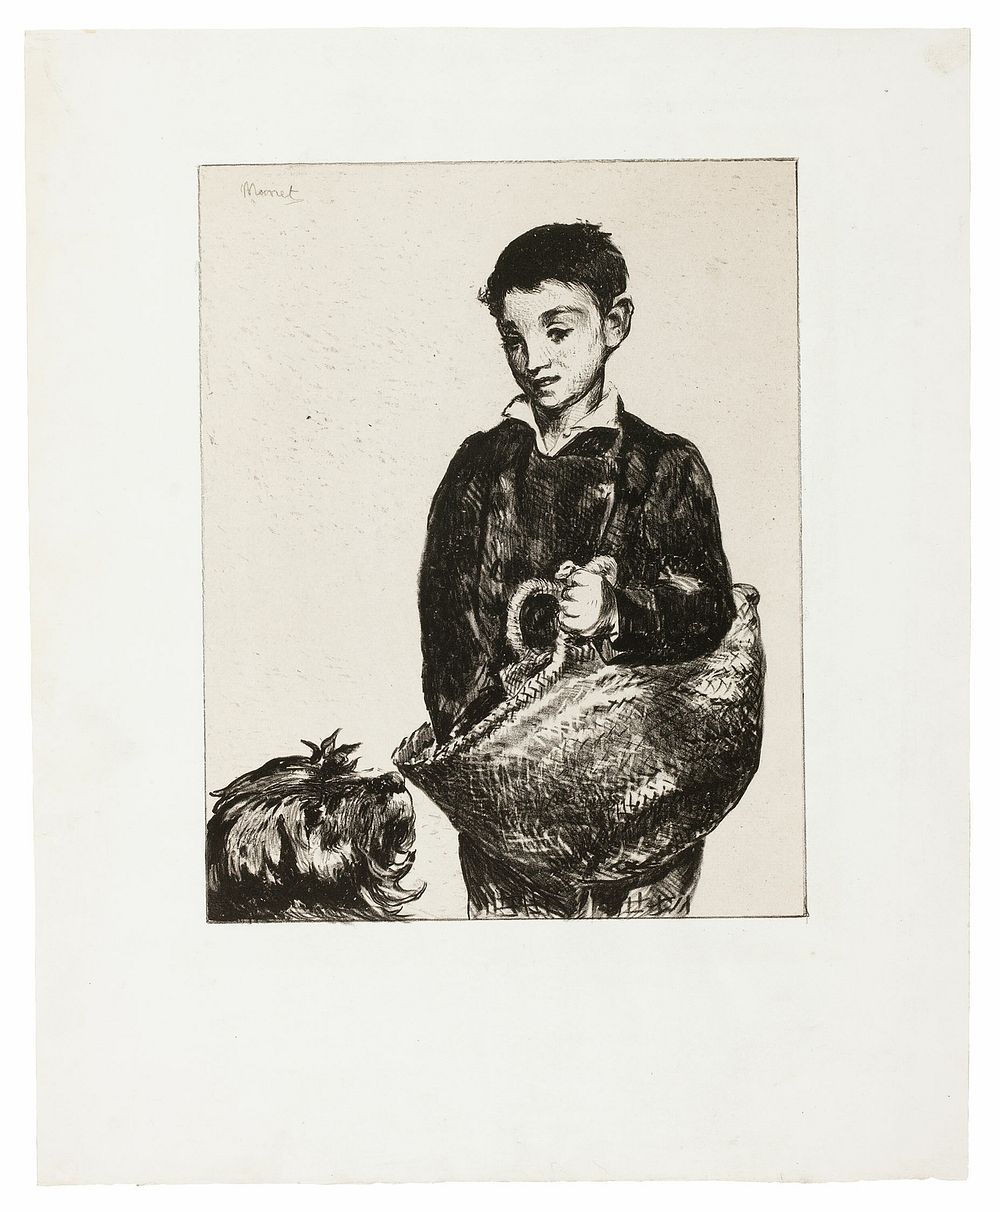 The Urchin by Édouard Manet